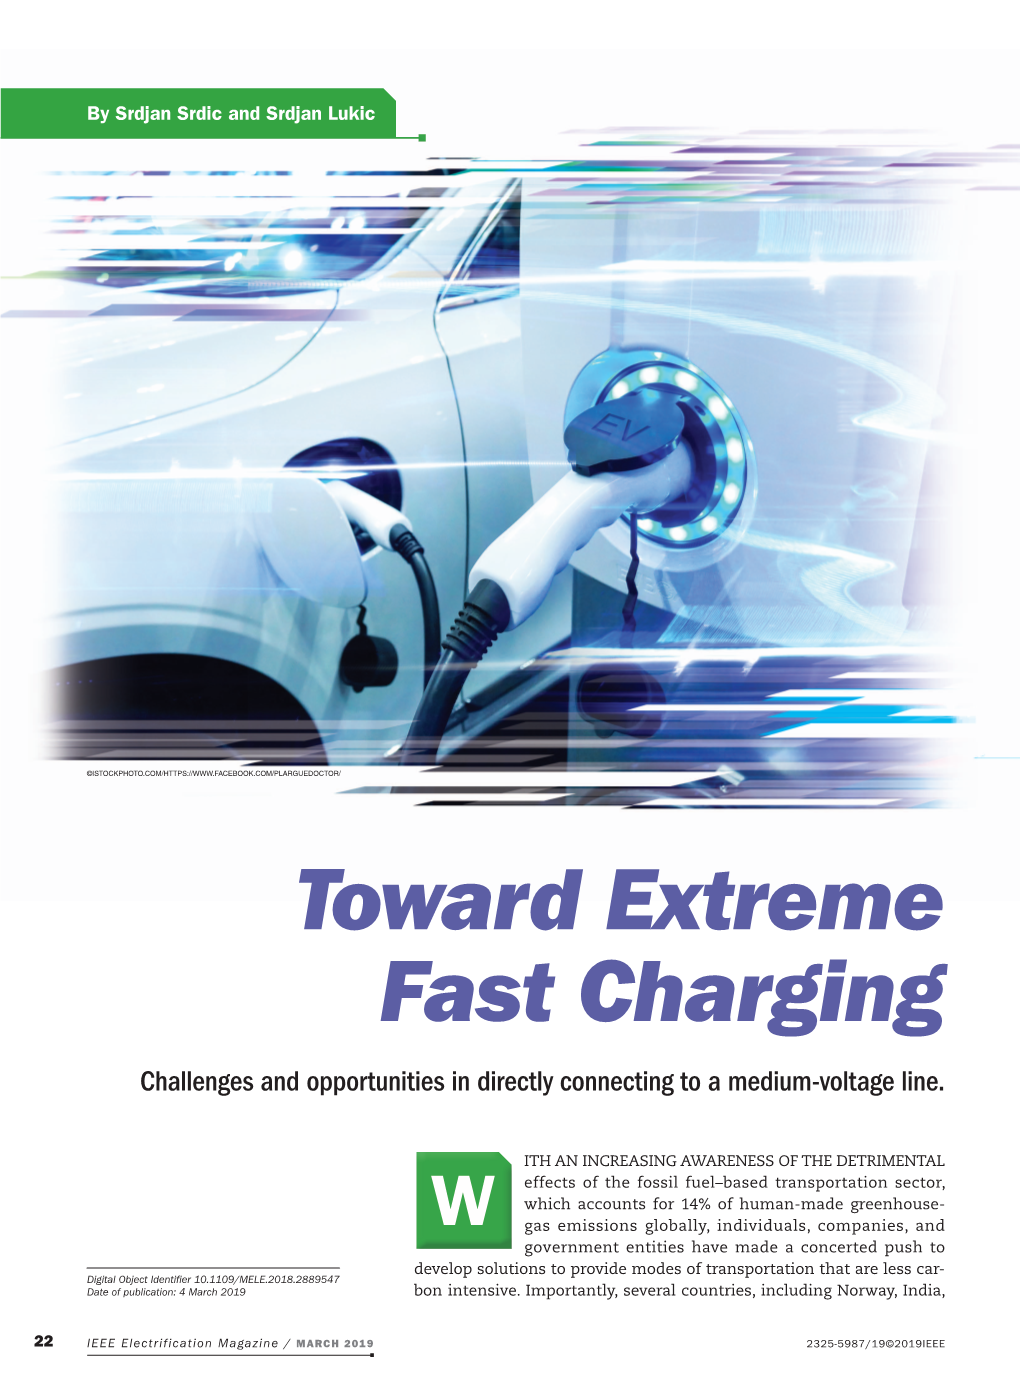 Toward Extreme Fast Charging Challenges and Opportunities in Directly Connecting to a Medium-Voltage Line